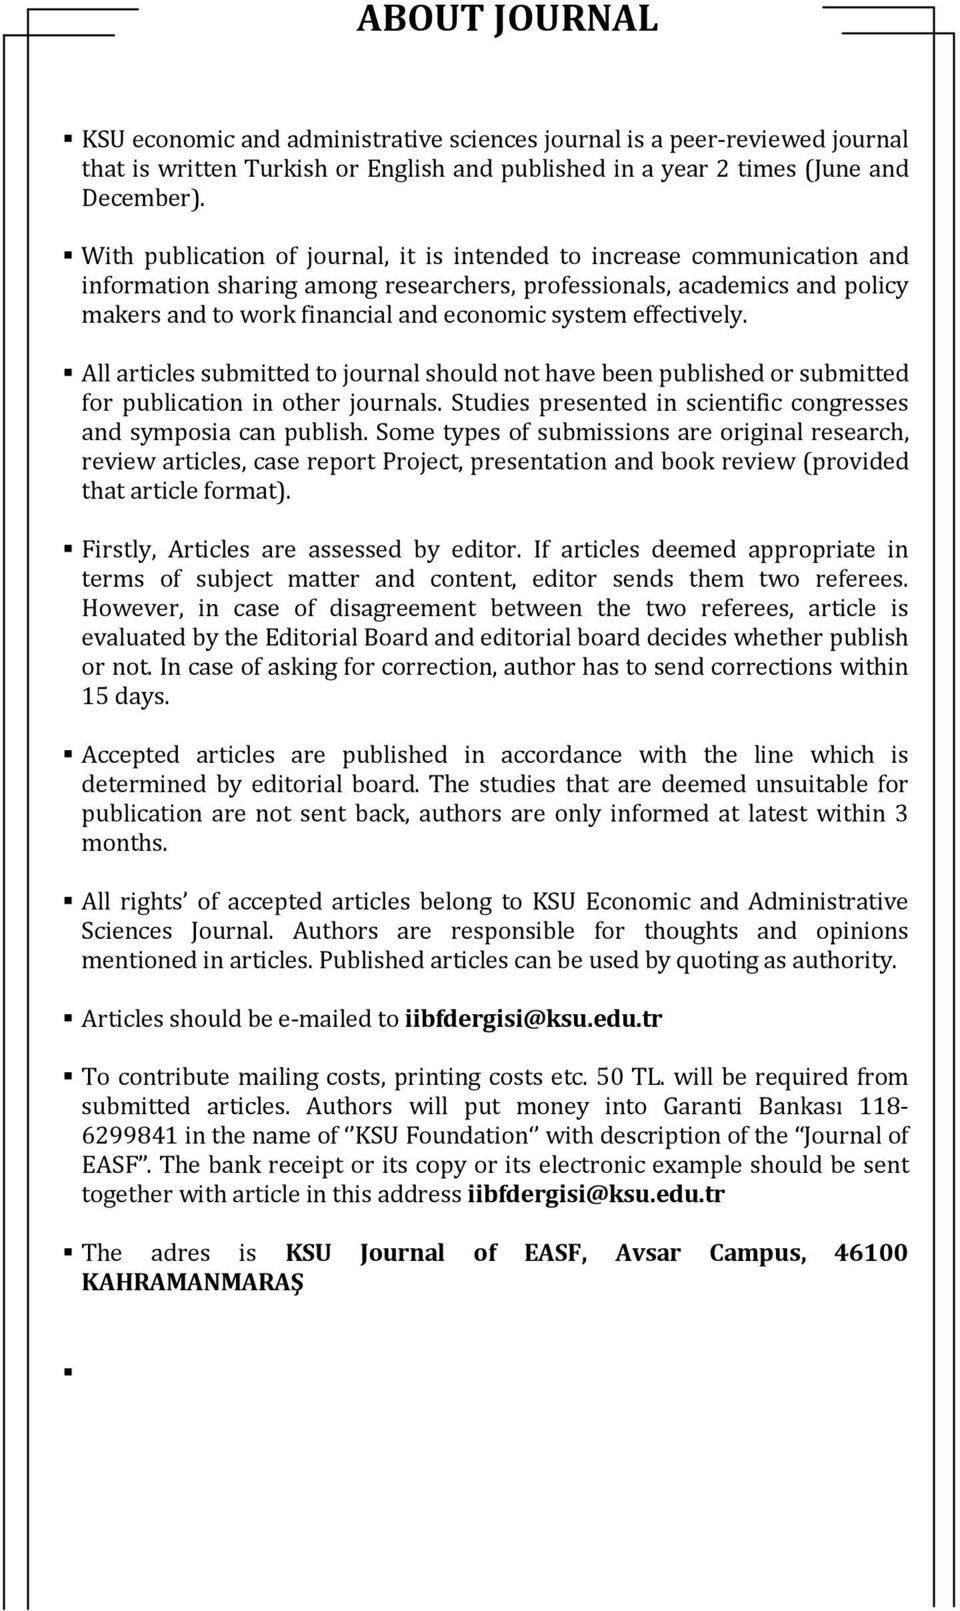 effectively. All articles submitted to journal should not have been published or submitted for publication in other journals. Studies presented in scientific congresses and symposia can publish.